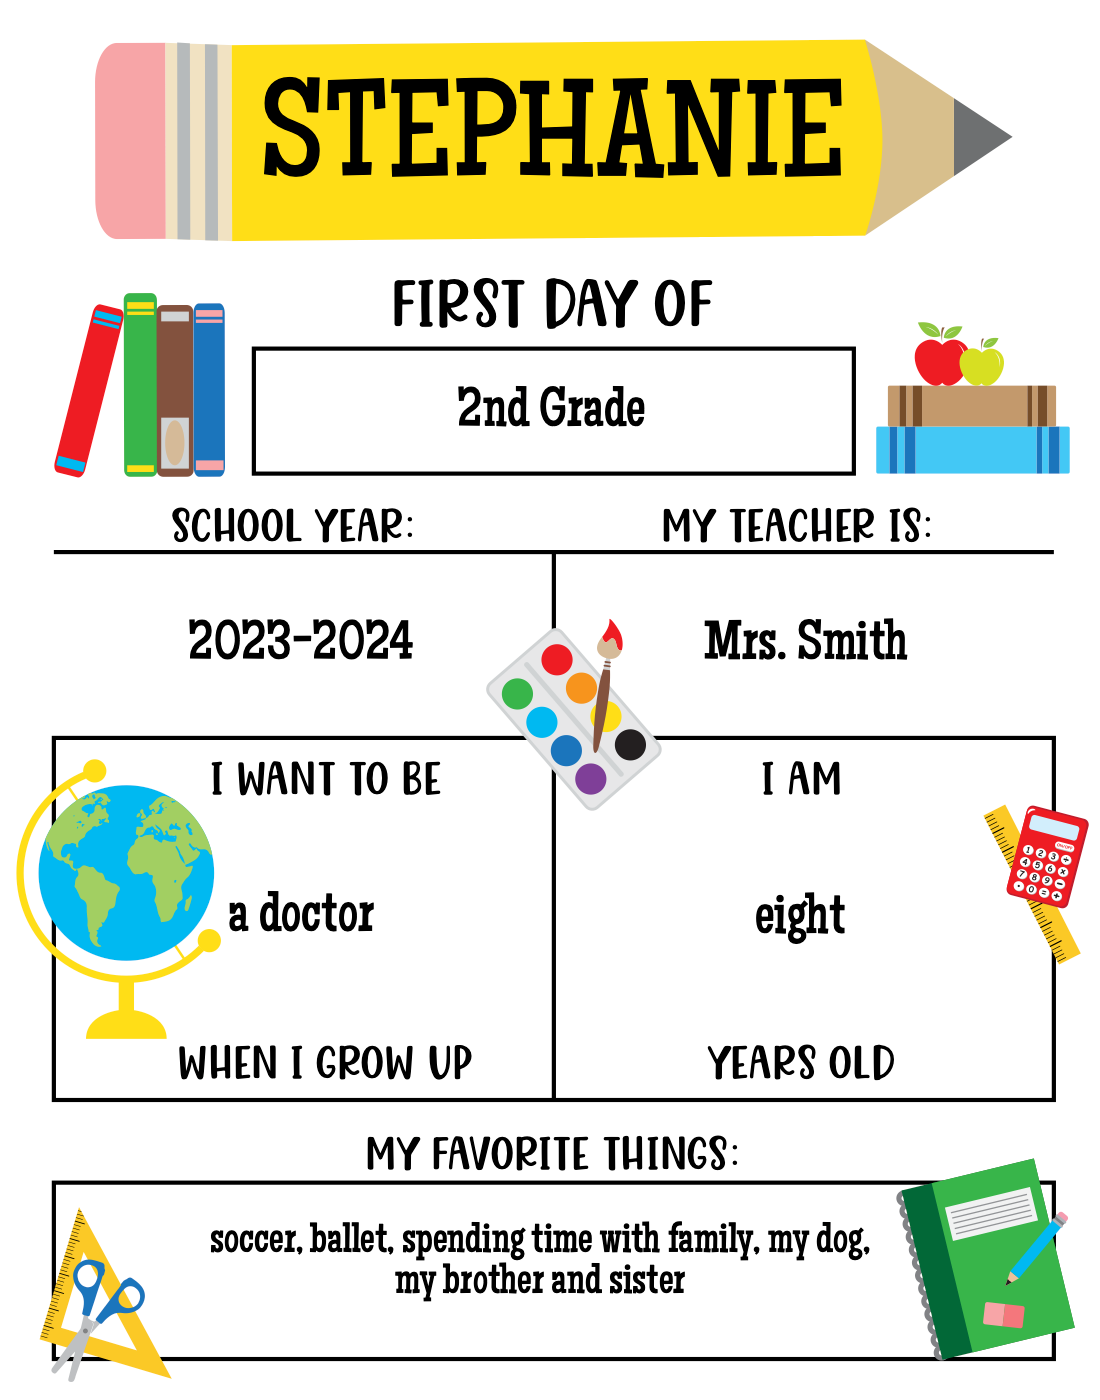 Free Printable First Day of School Photo Sign | The Party Darling